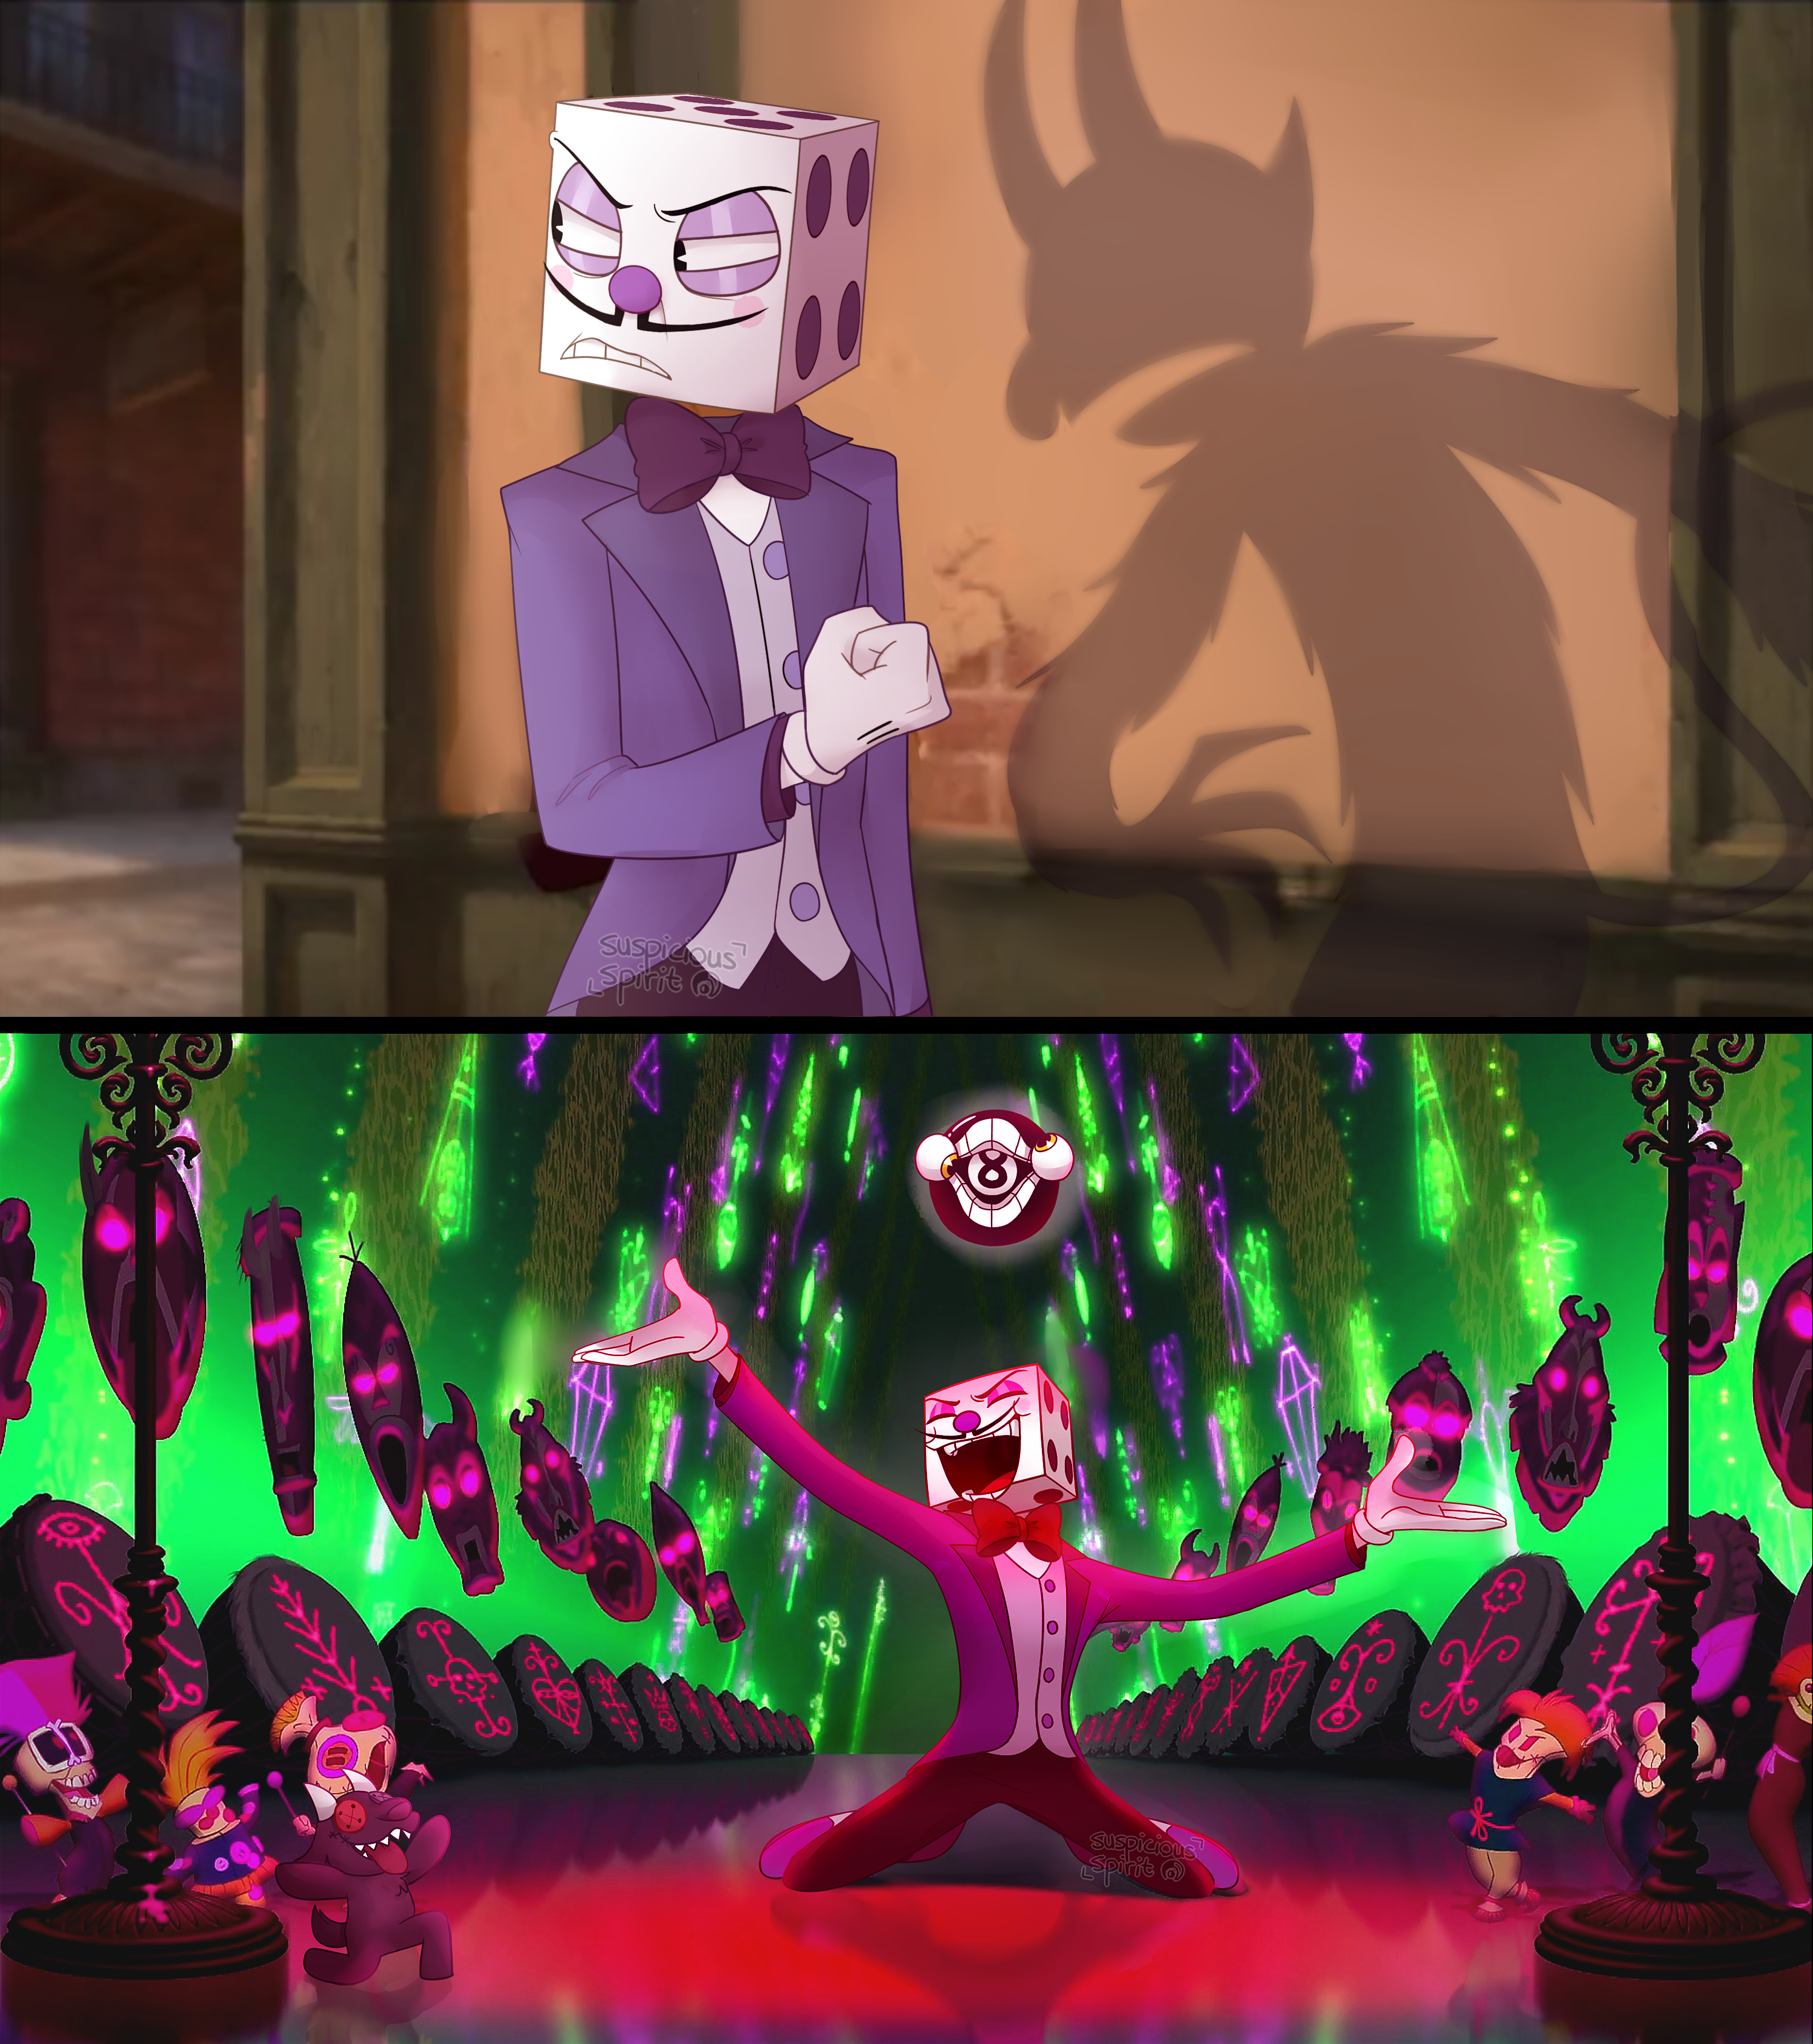 King Dice Crossovers on King-Dice-FC - DeviantArt.